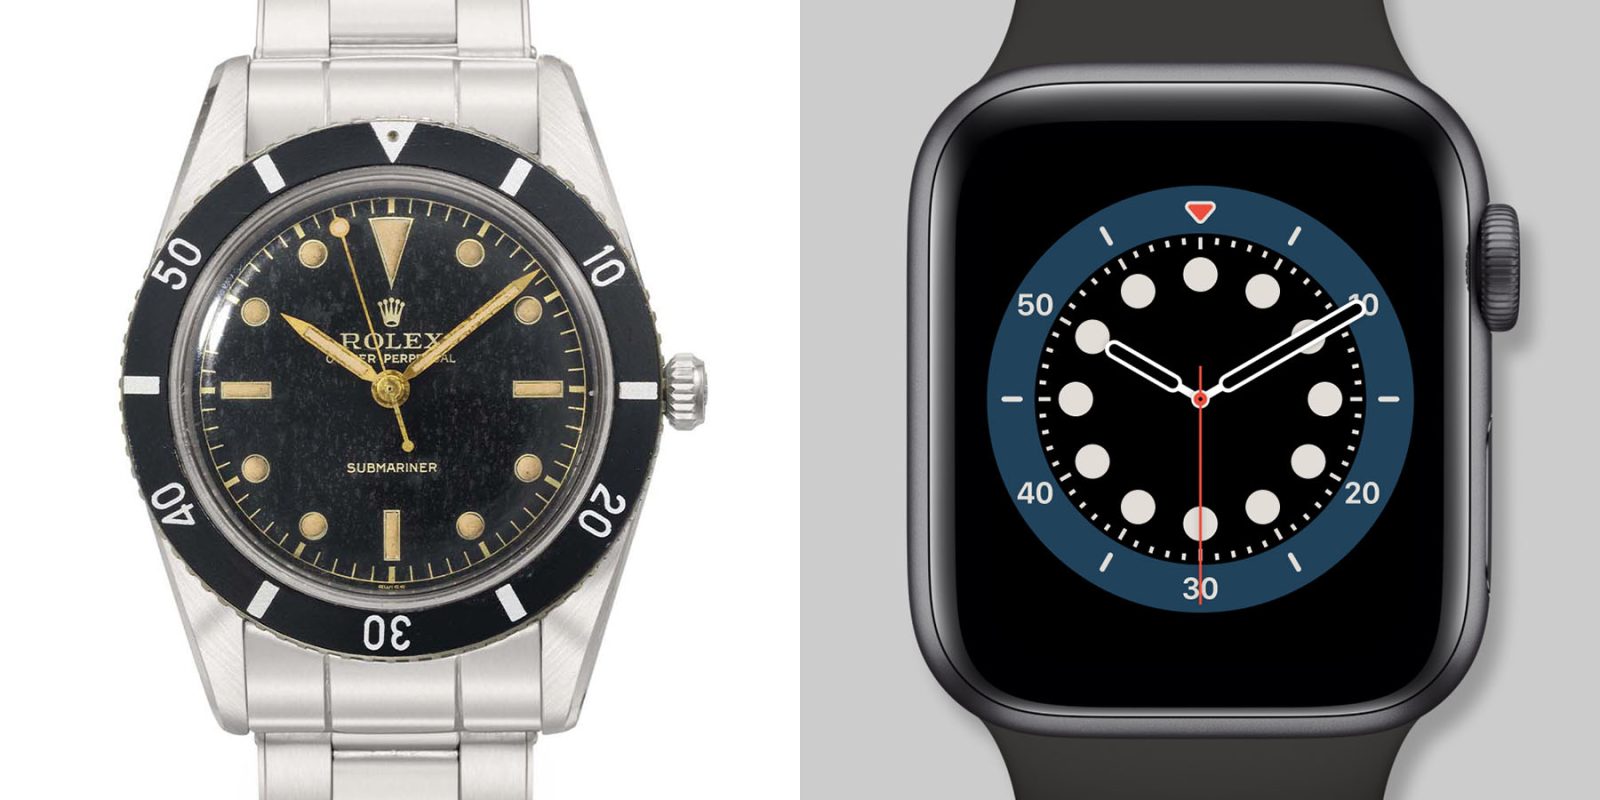 The iconic watches behind Apple Watch faces